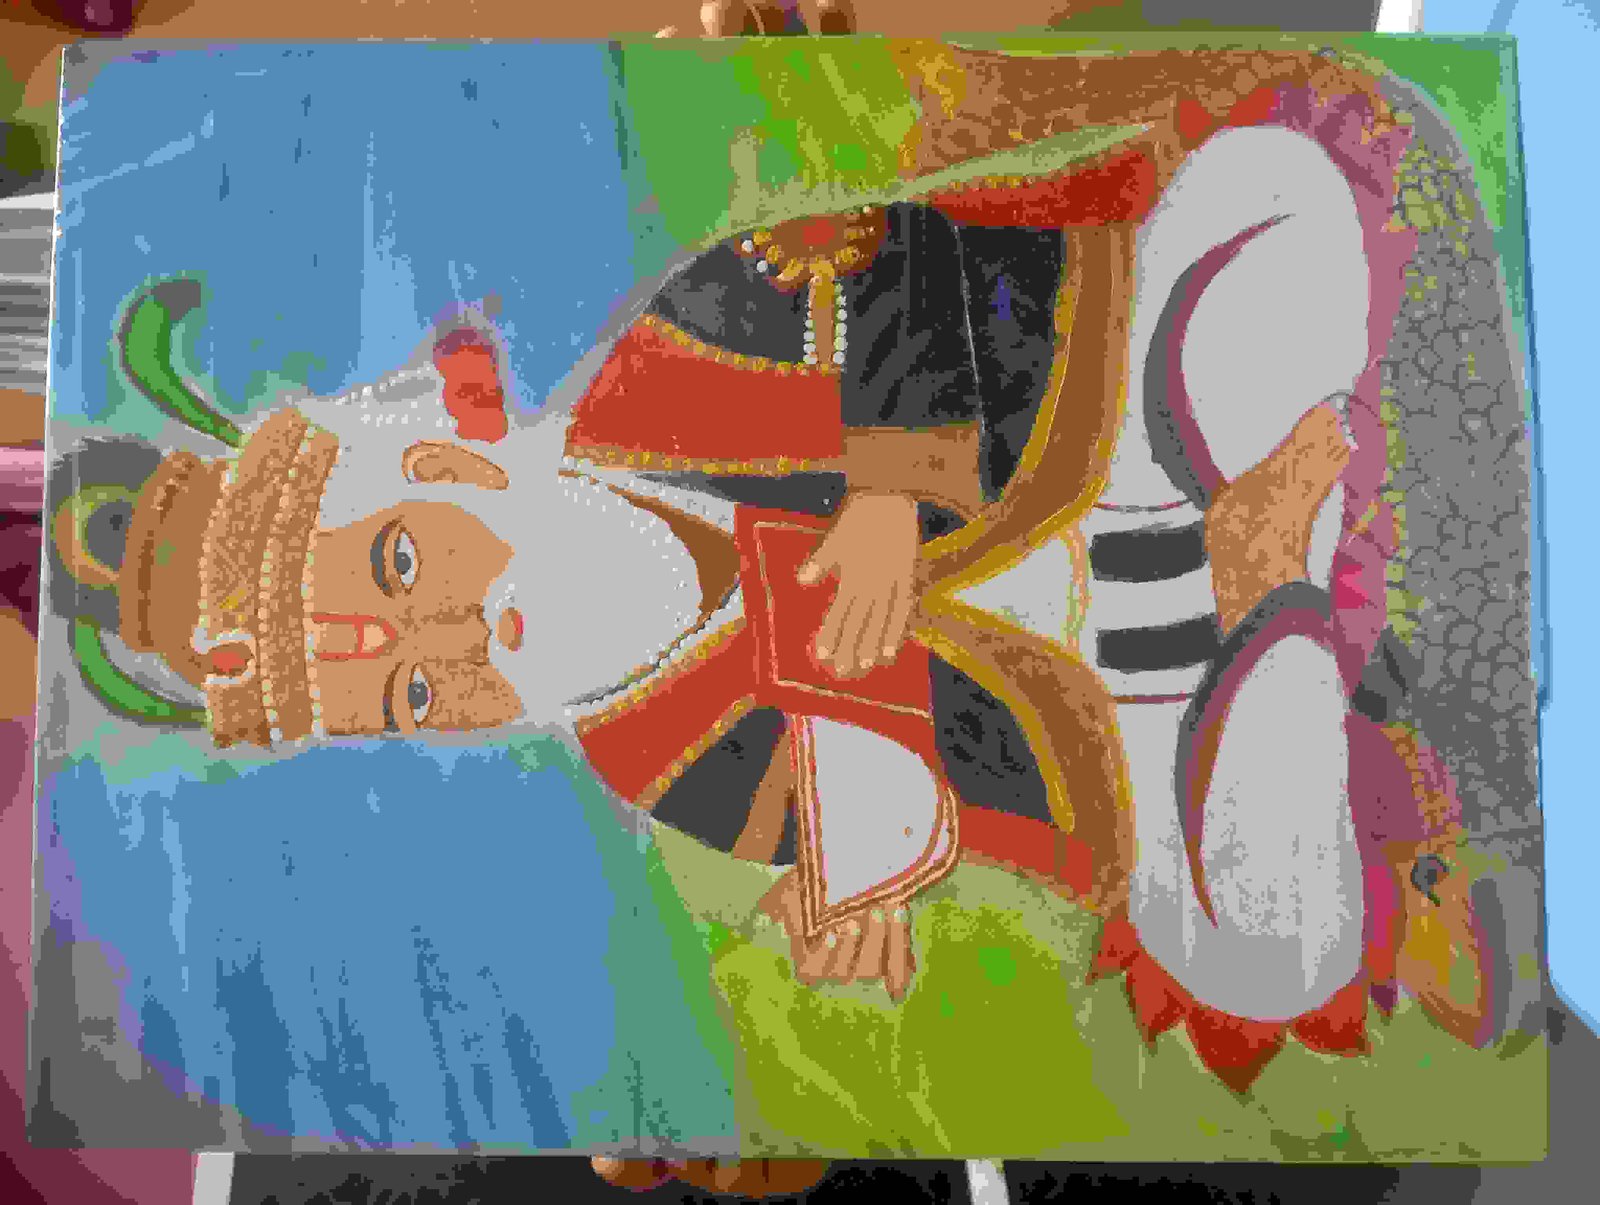 This Is The Acrylic Painting Of Jhulelal The Goddess Of Sind